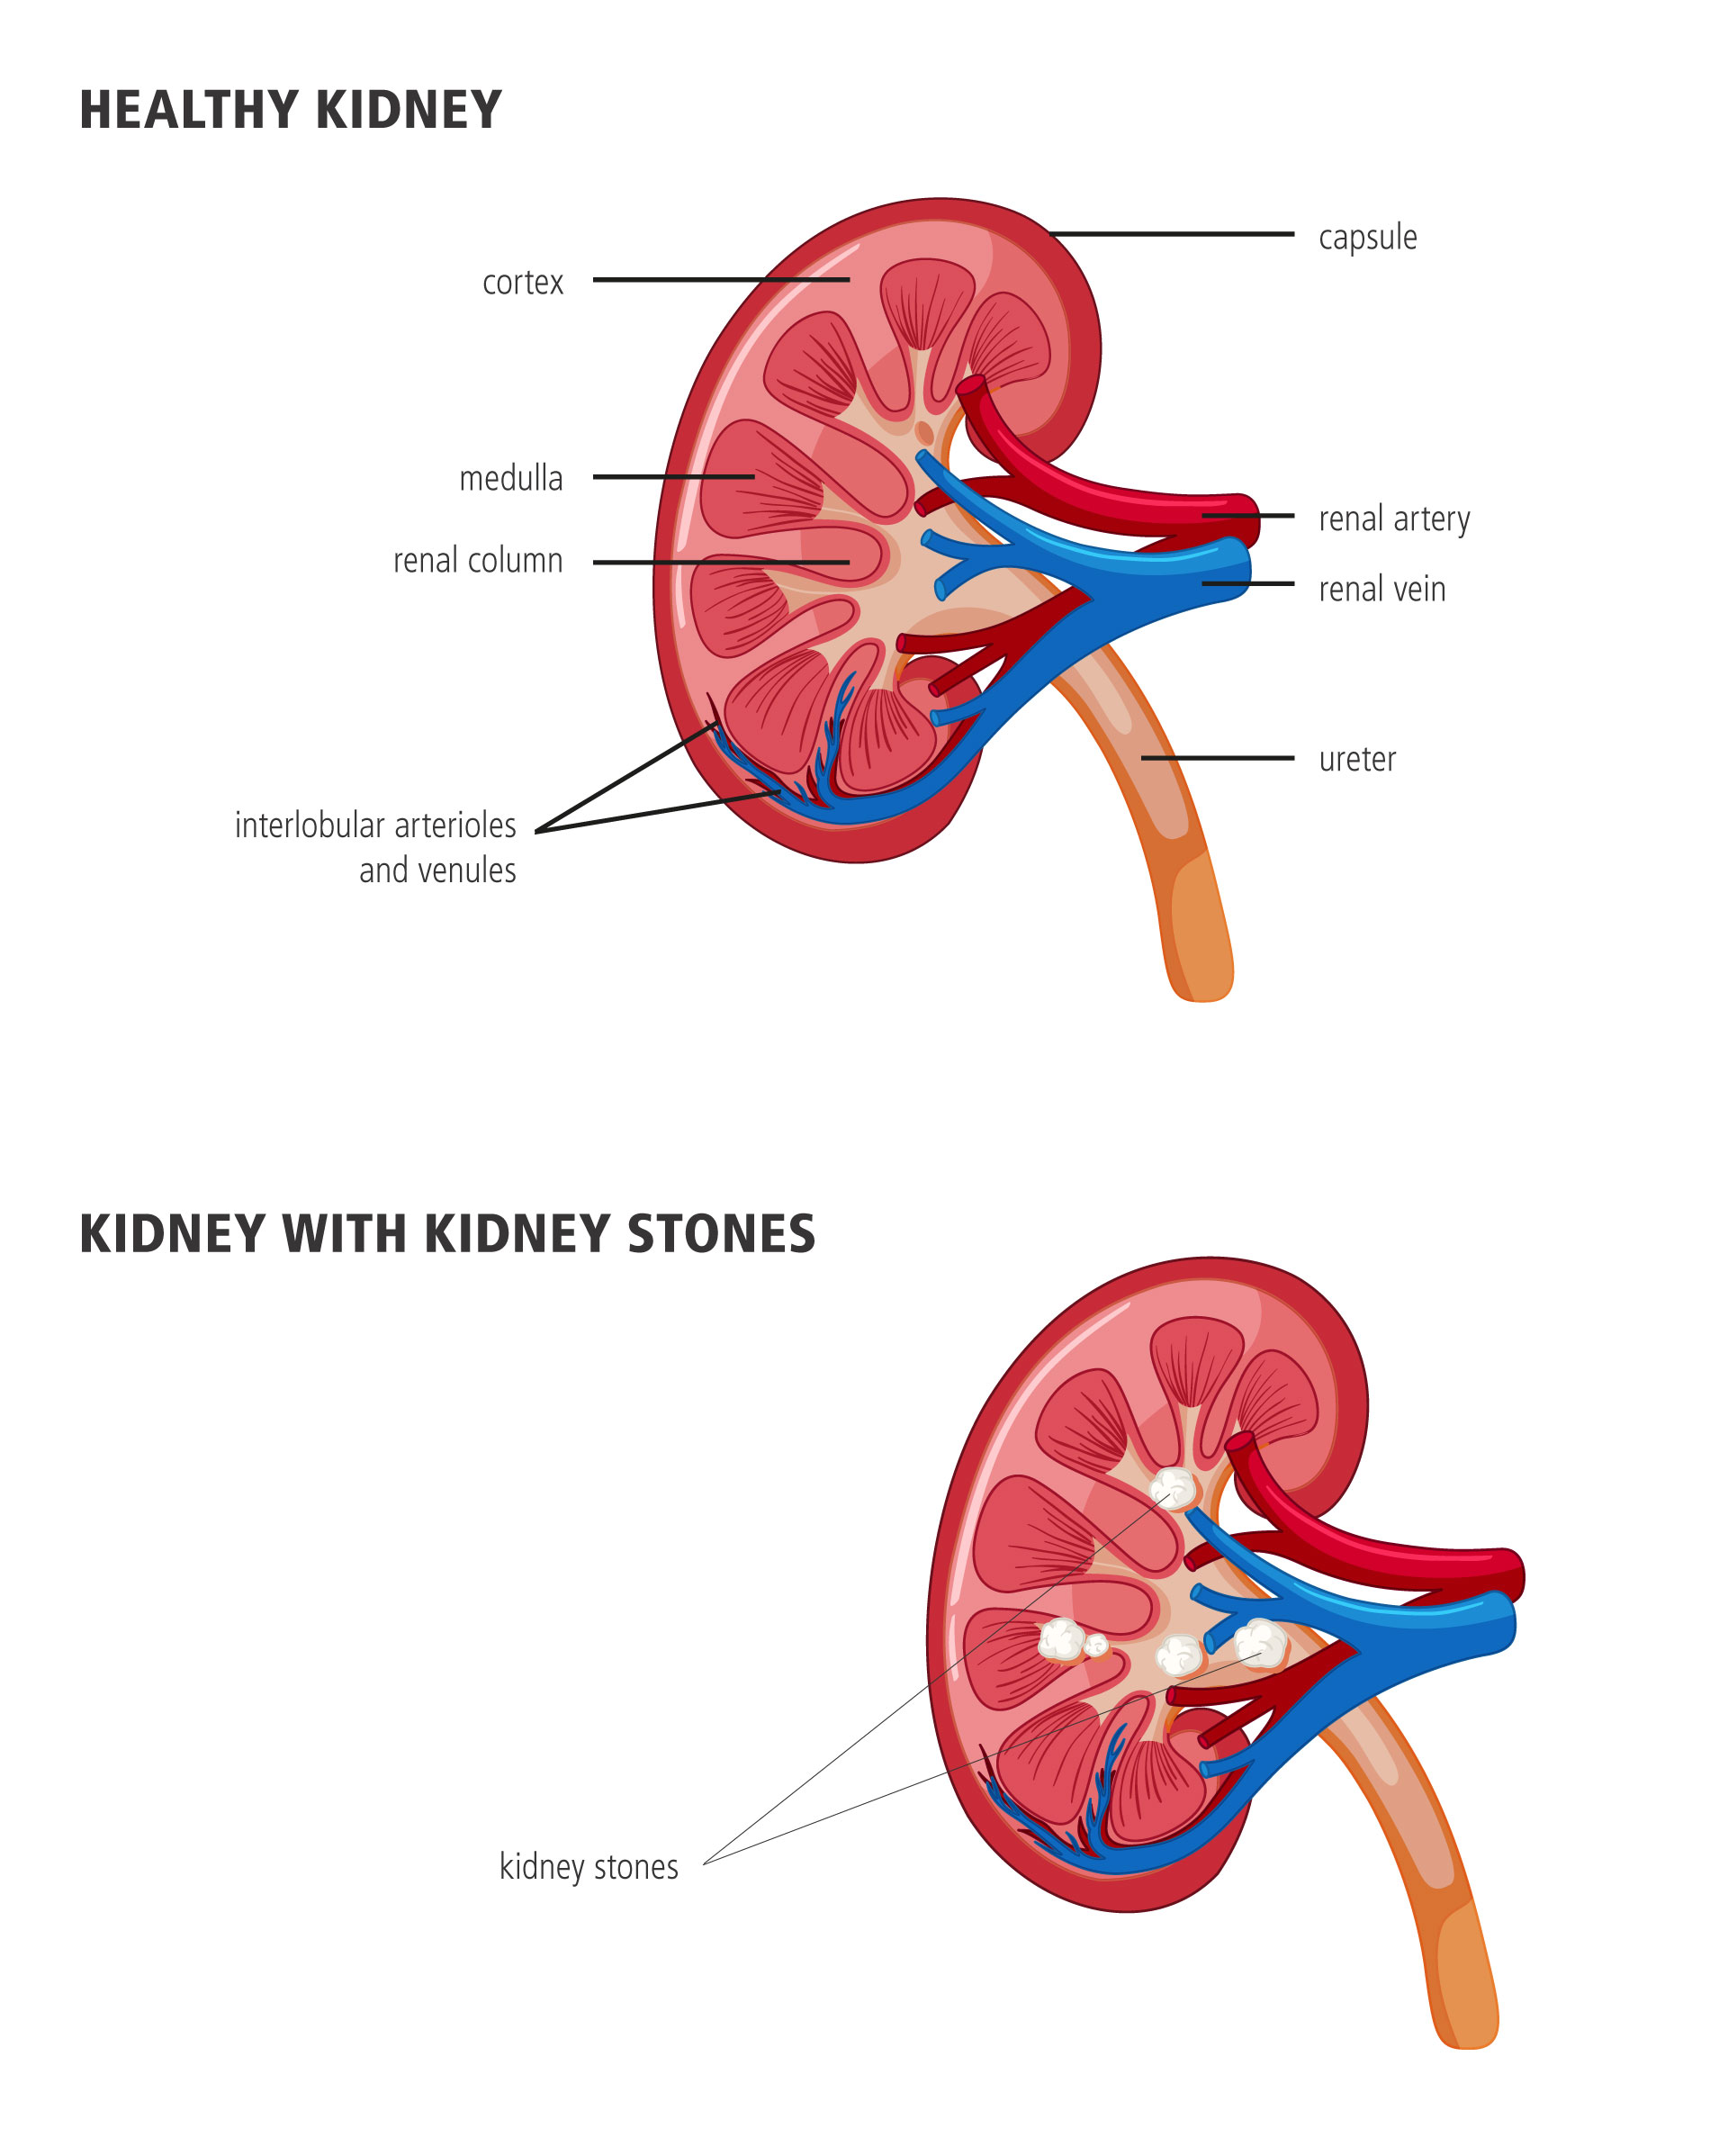 Healthy Kidney and Kidney with Kidney Stones